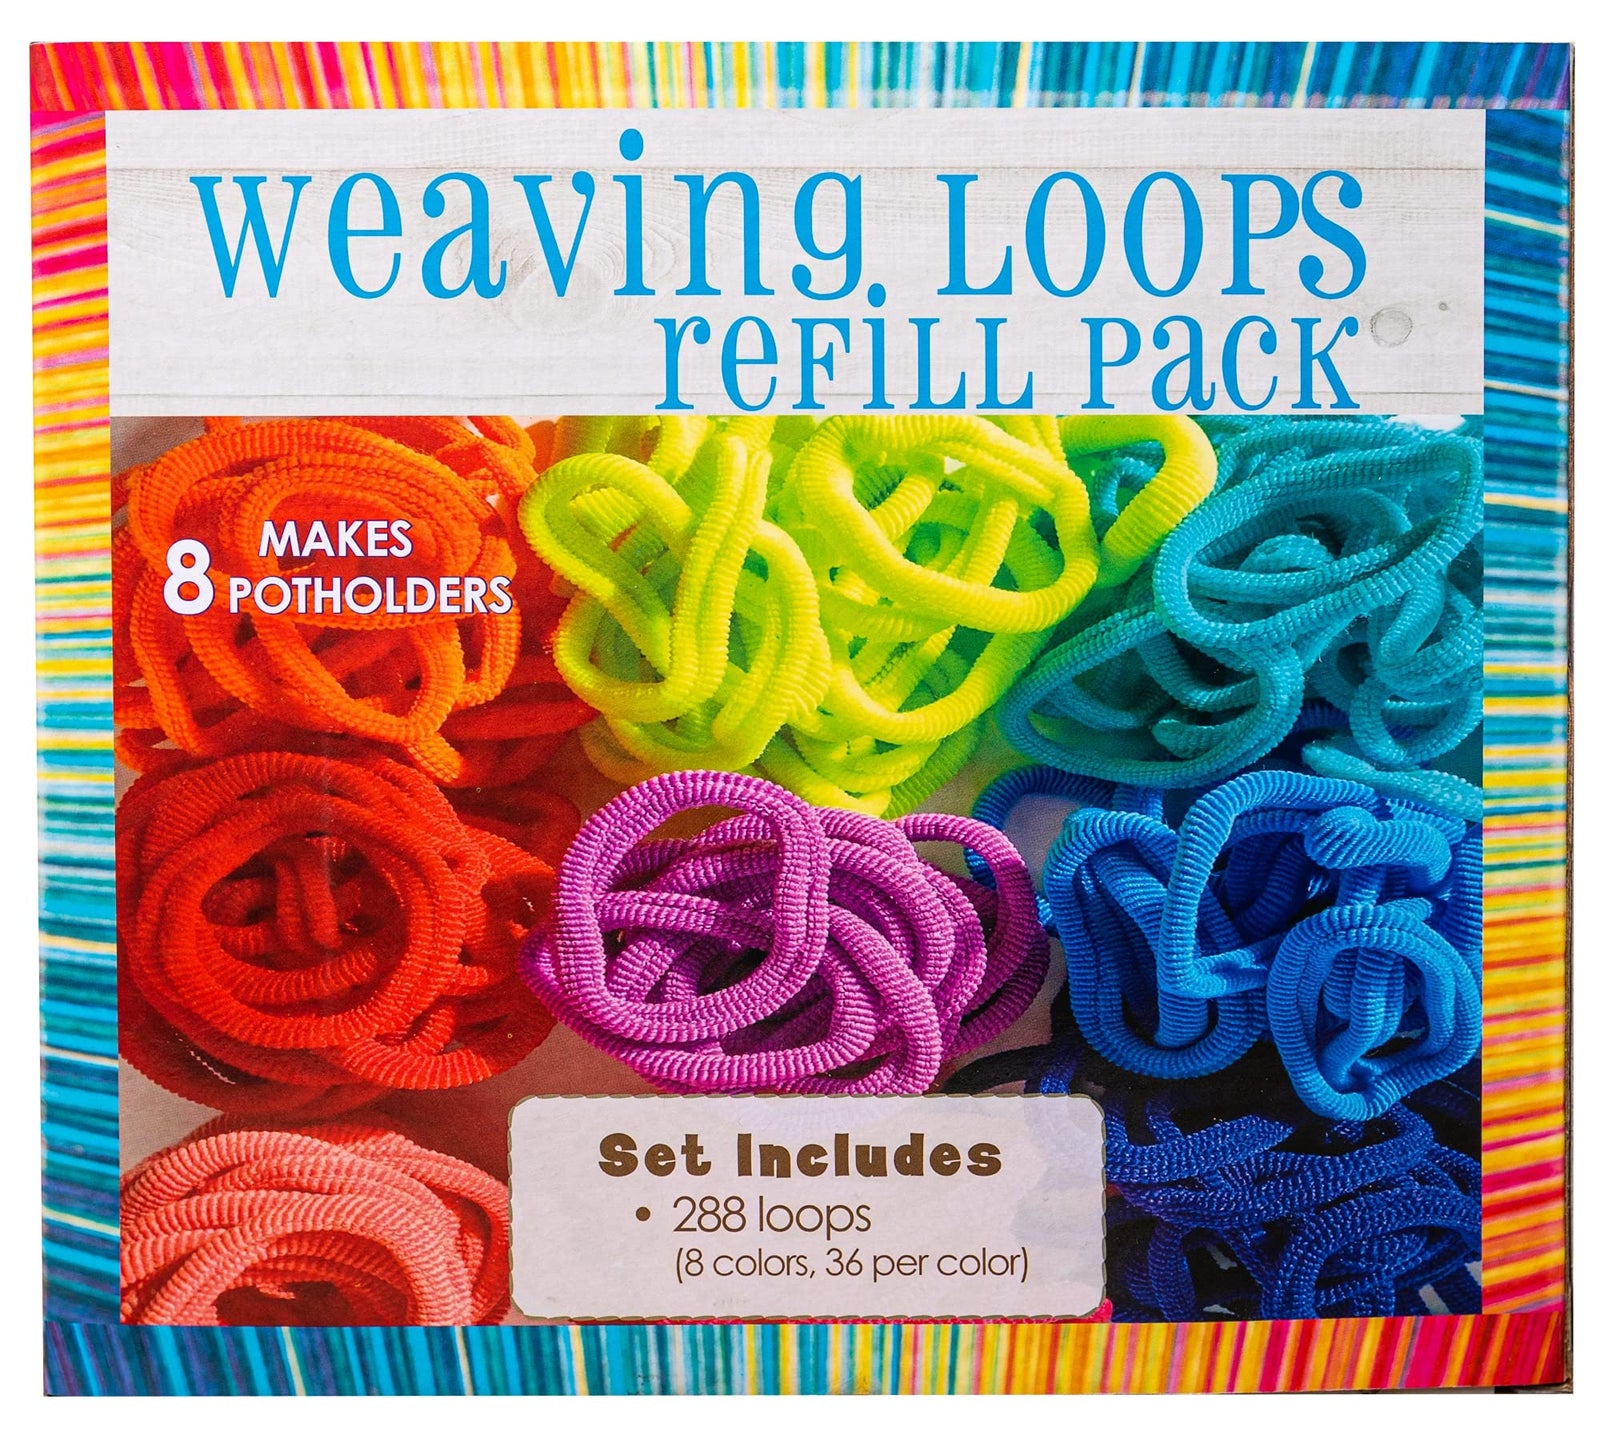 Make Your Own Potholders Weaving Loom Kit Arts and Crafts Kit for Kids Girls and Boys Ages 6 7 8 9 10 11 12 13 Years Old and Up